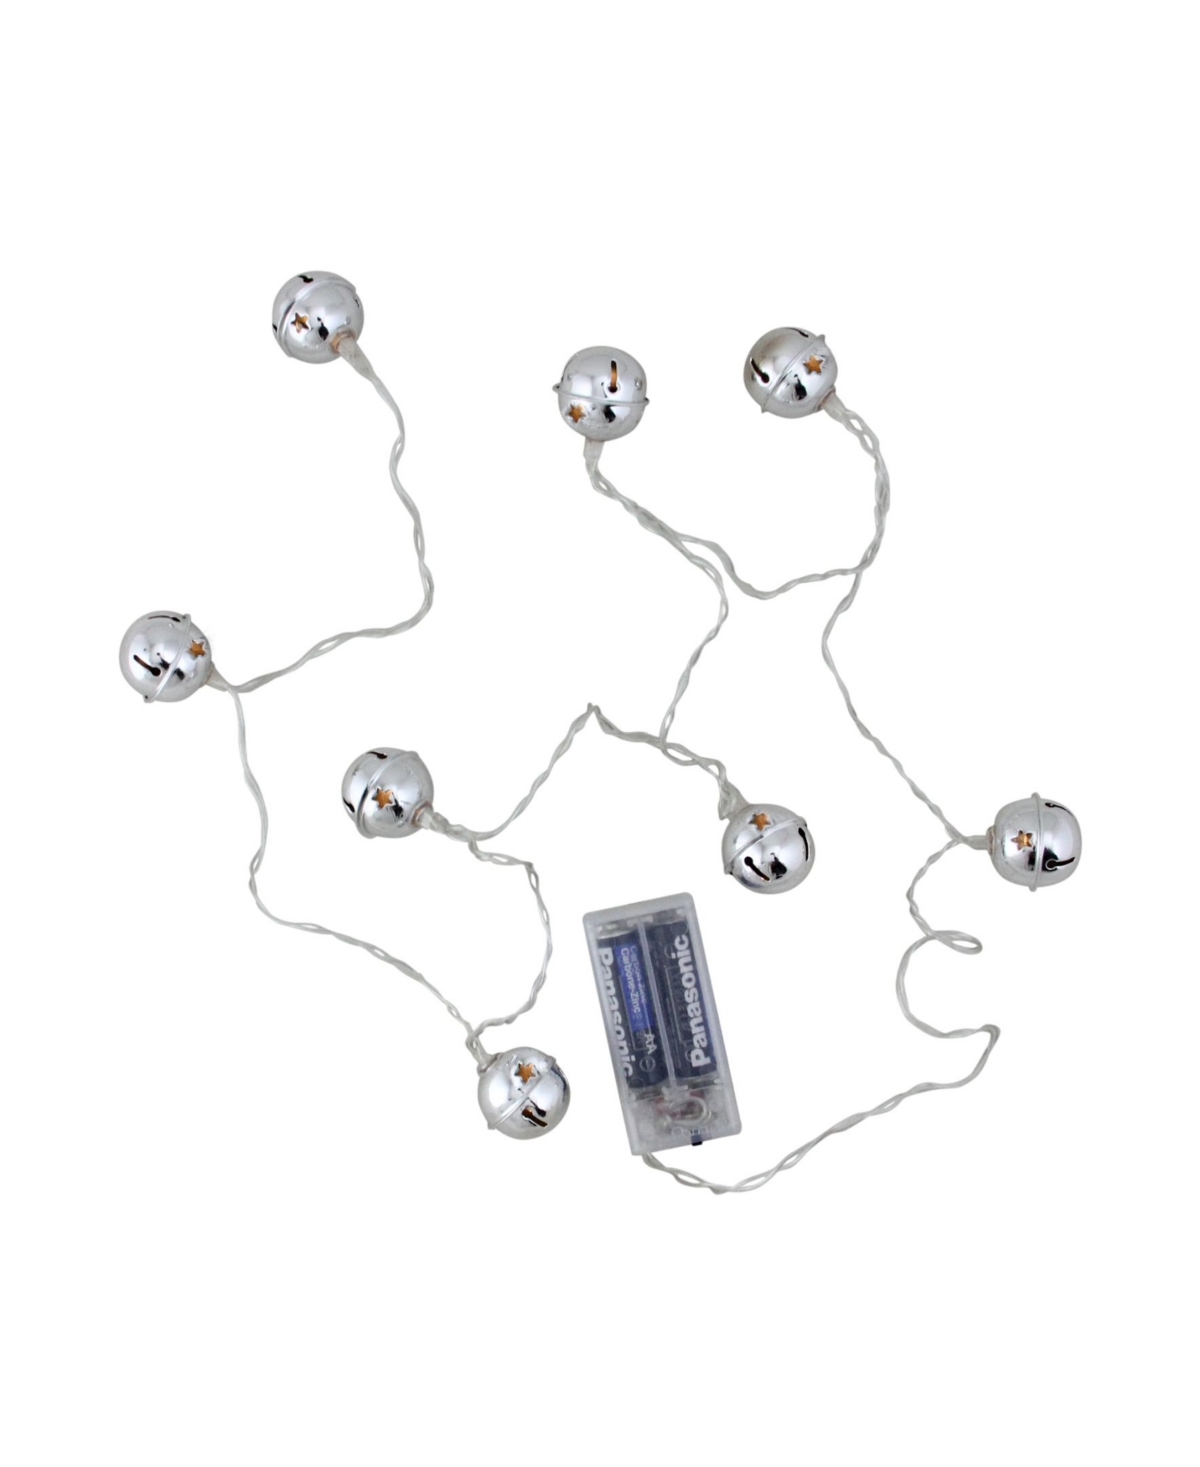 Set of 8 Battery Operated Led Silver Jingle Bell Novelty Christmas Lights - Clear Lights - Silver